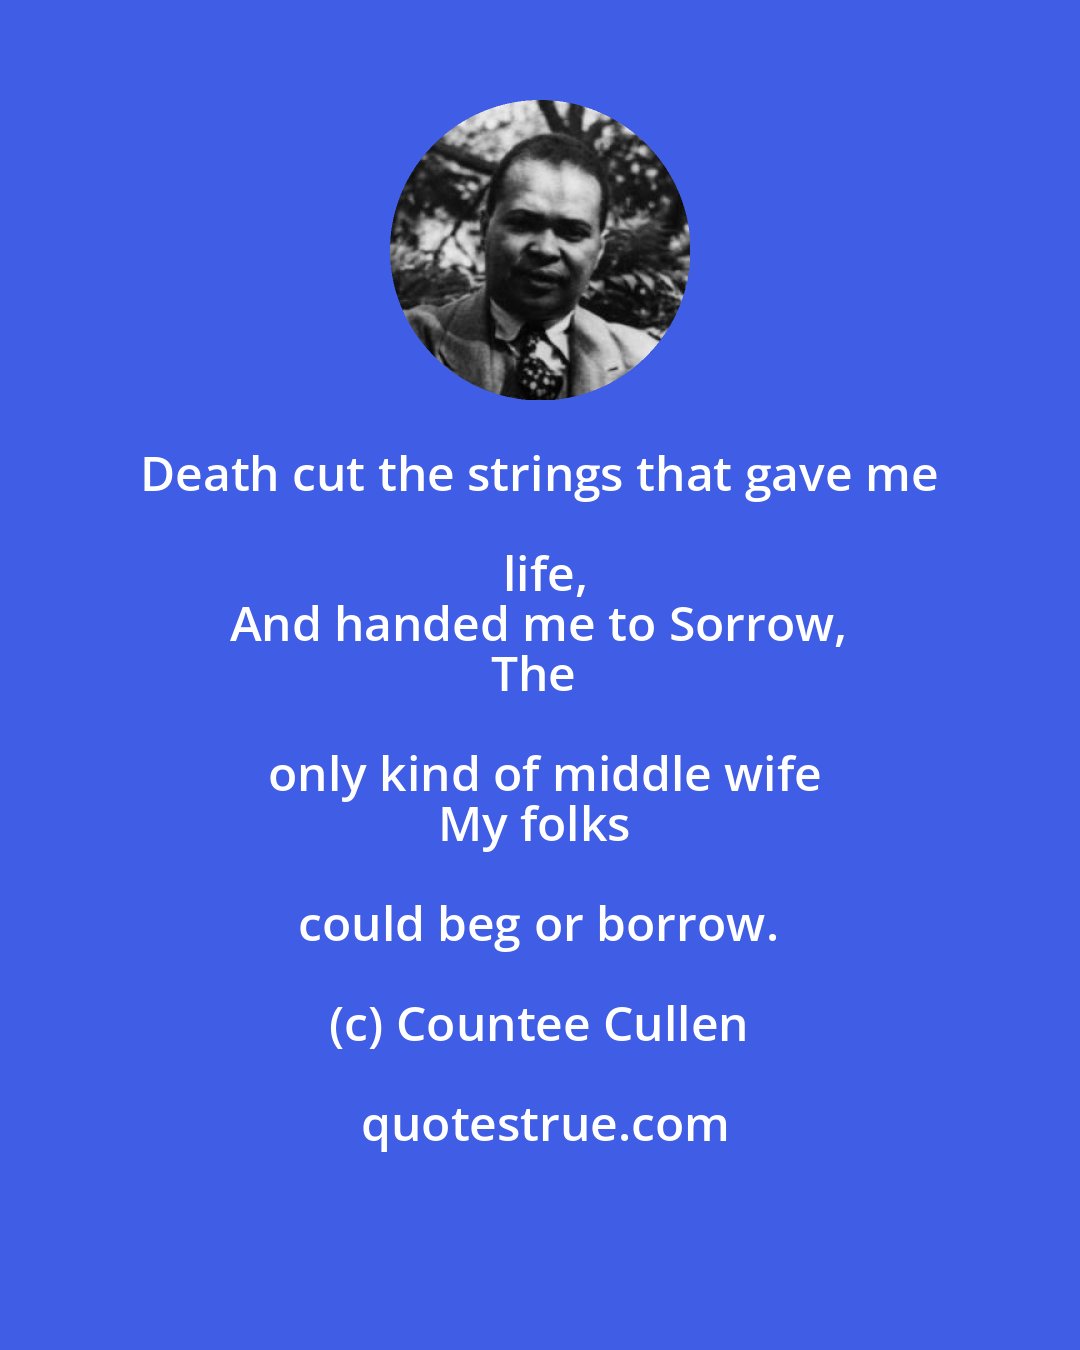 Countee Cullen: Death cut the strings that gave me life,
And handed me to Sorrow,
The only kind of middle wife
My folks could beg or borrow.